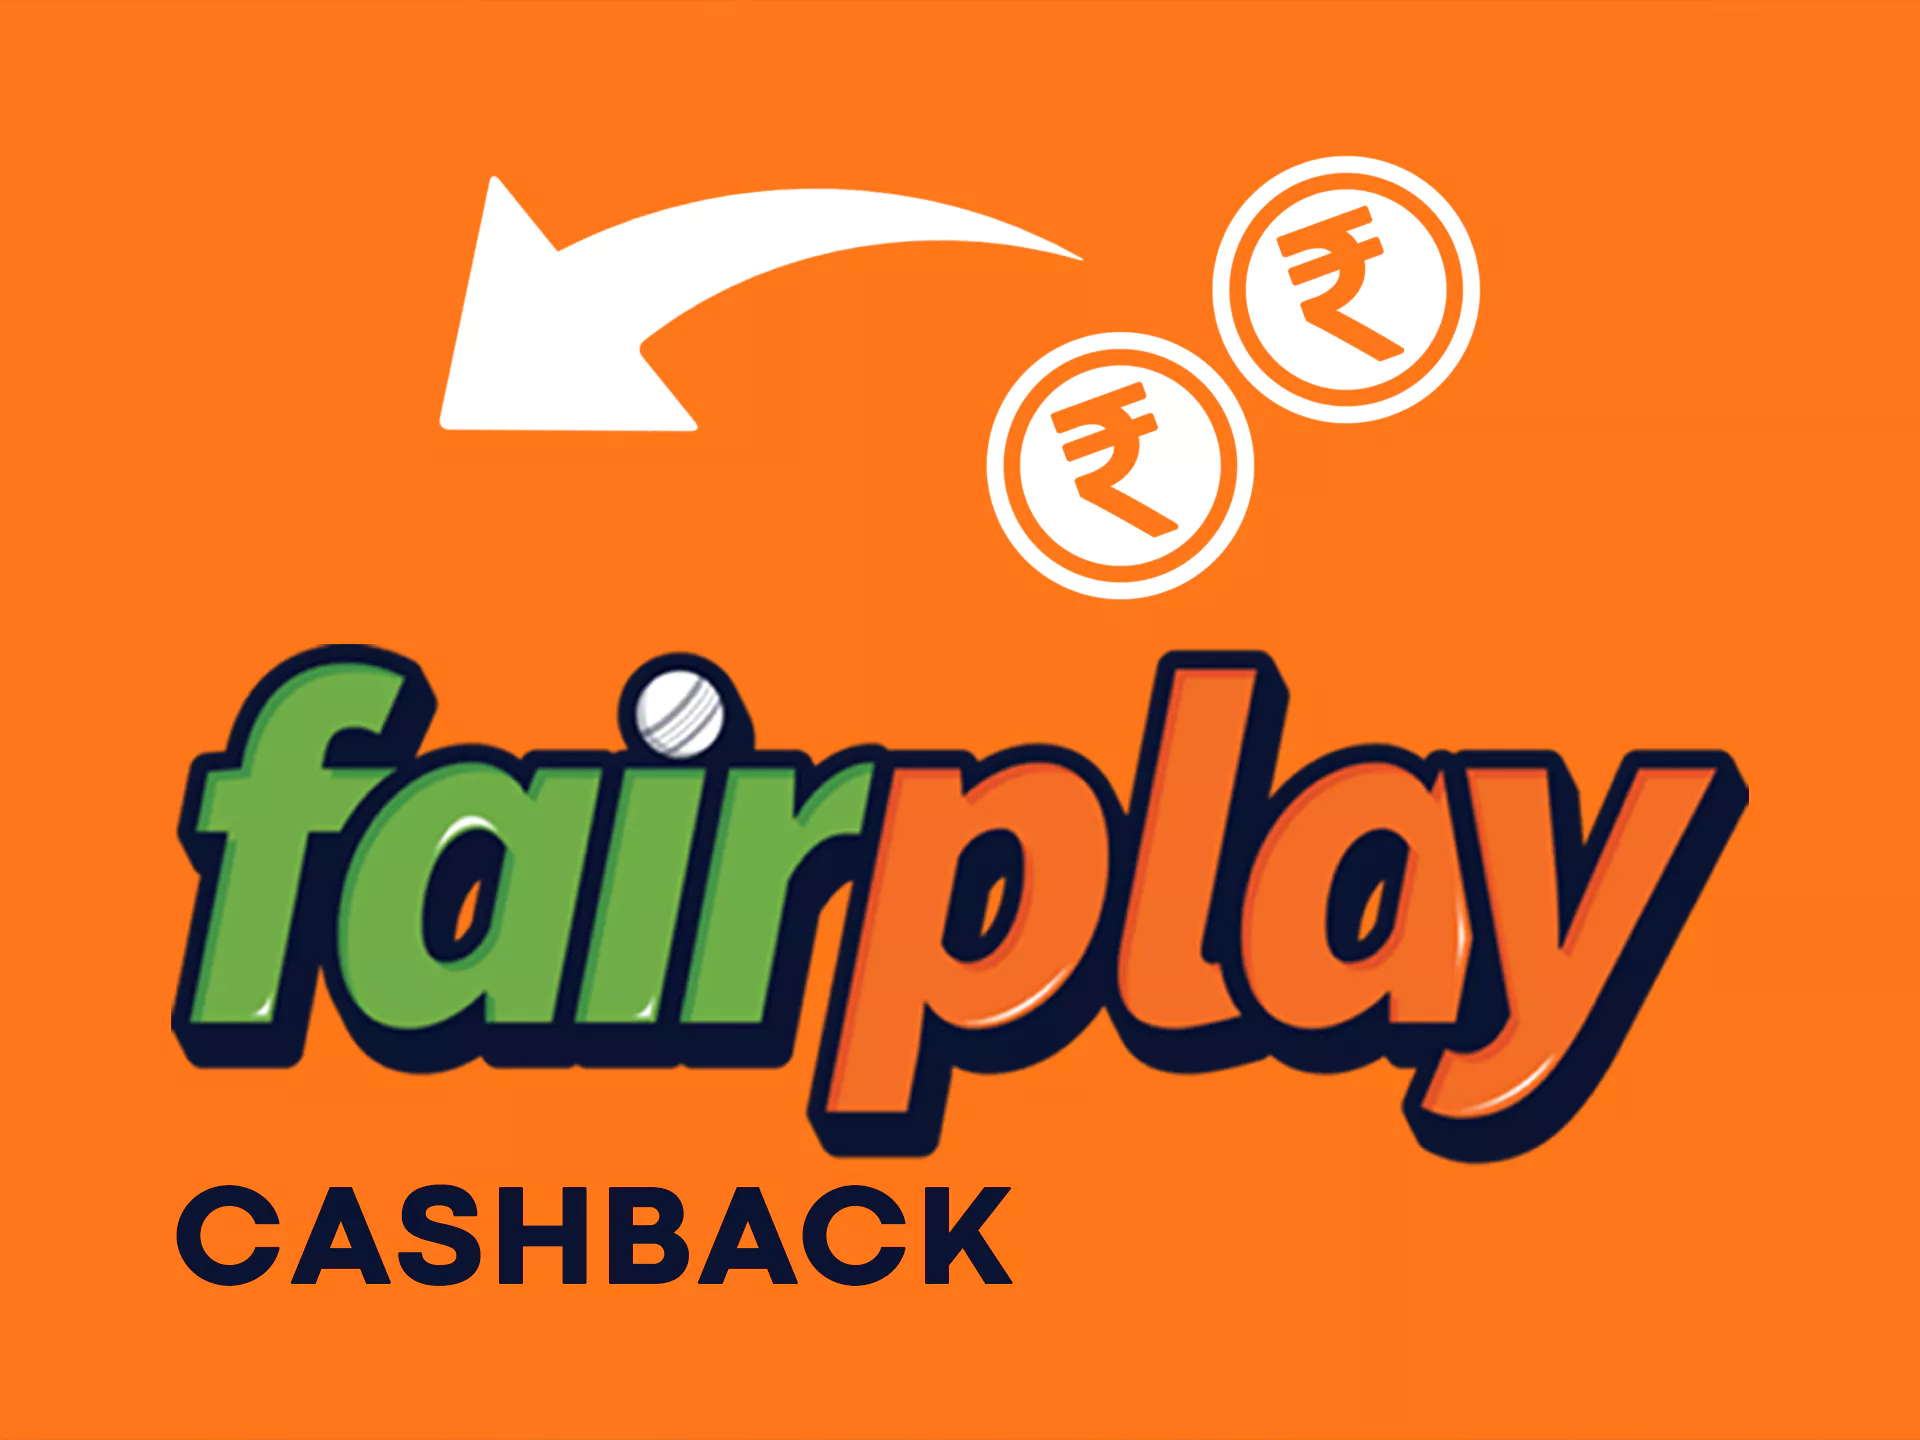 Earn money after deposits and bets at Fairplay.